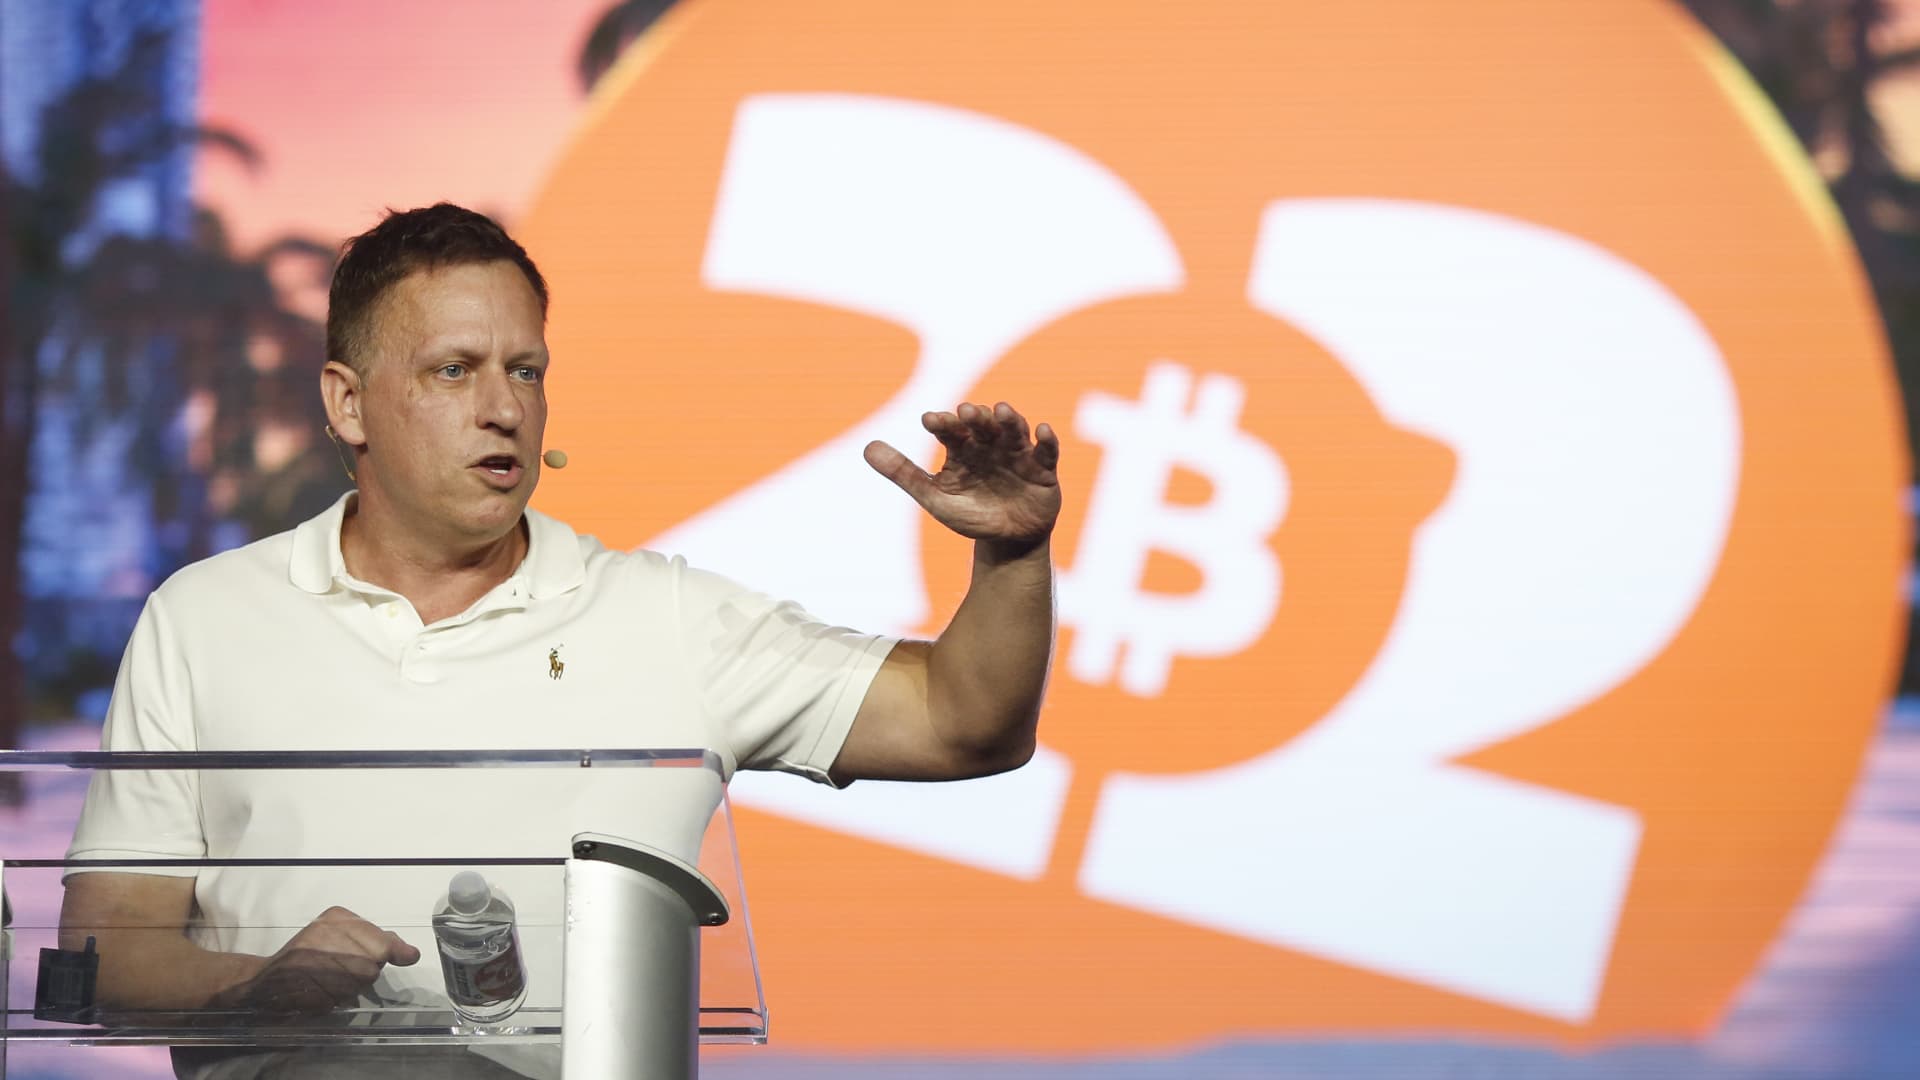 Peter Thiel, co-founder of PayPal, Palantir Technologies, and Founders Fund, gestures as he speaks during the Bitcoin 2022 Conference at Miami Beach Convention Center on April 7, 2022 in Miami, Florida.